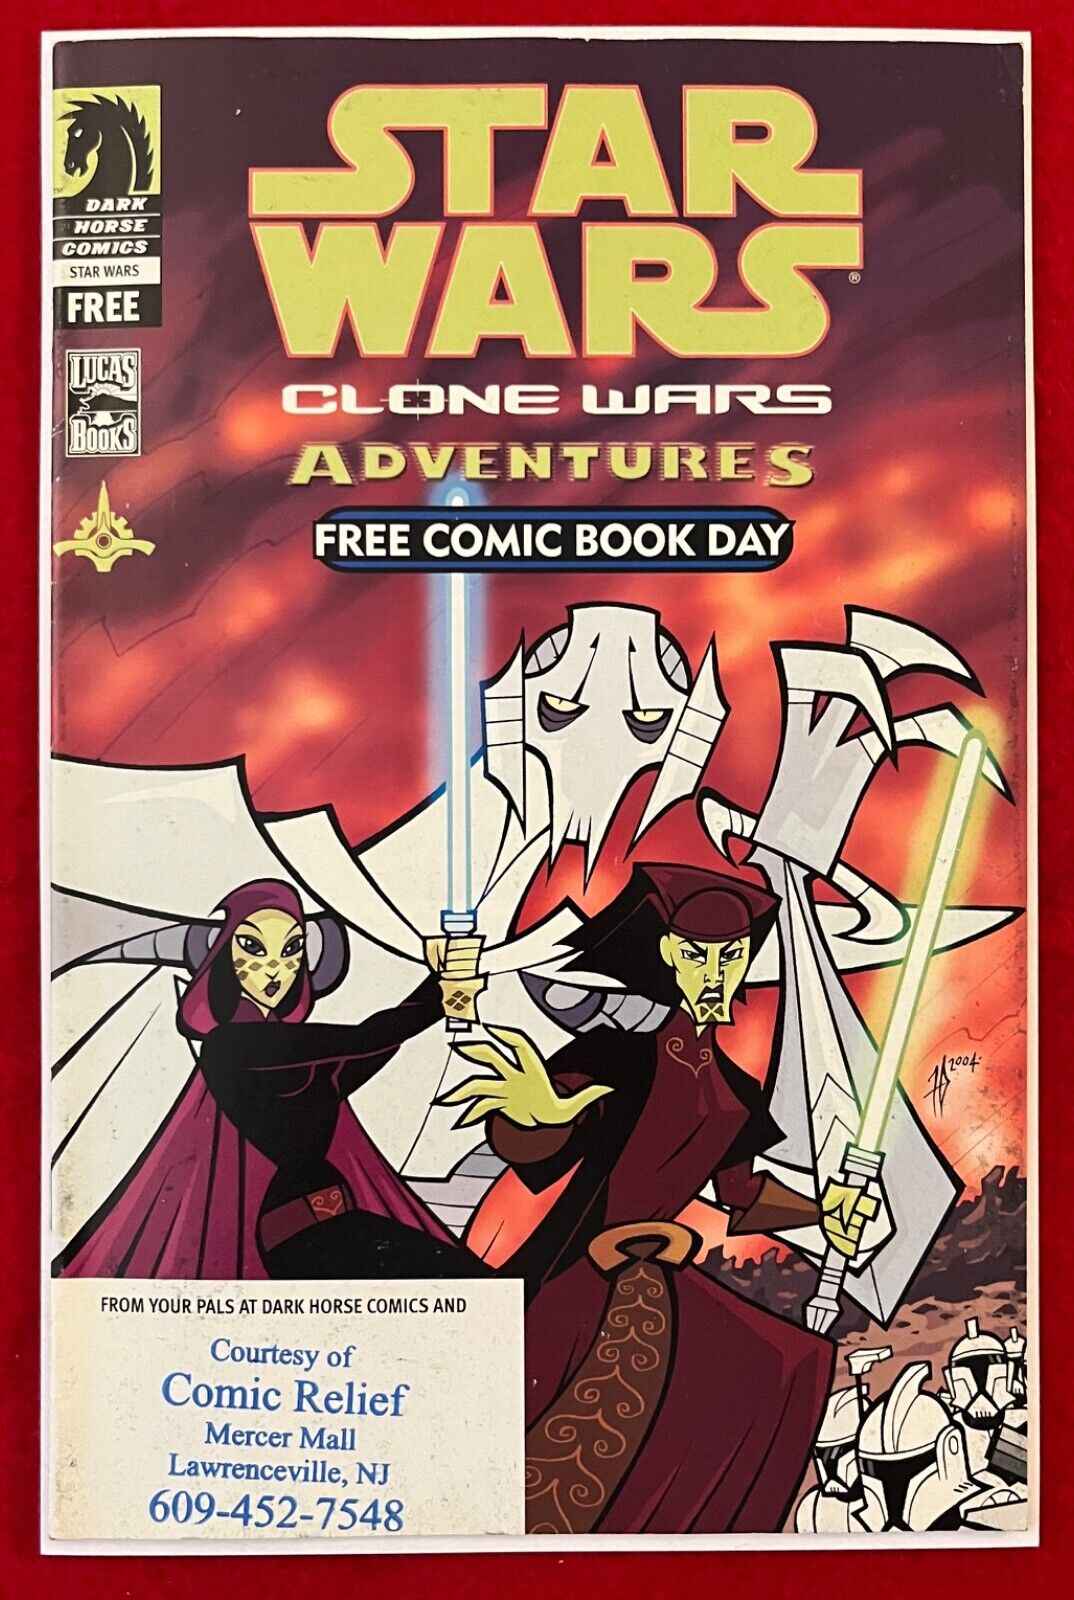 DHC Star Wars Clone Wars Adventures Free Comic Book Day Edition July 2004 (VF+)